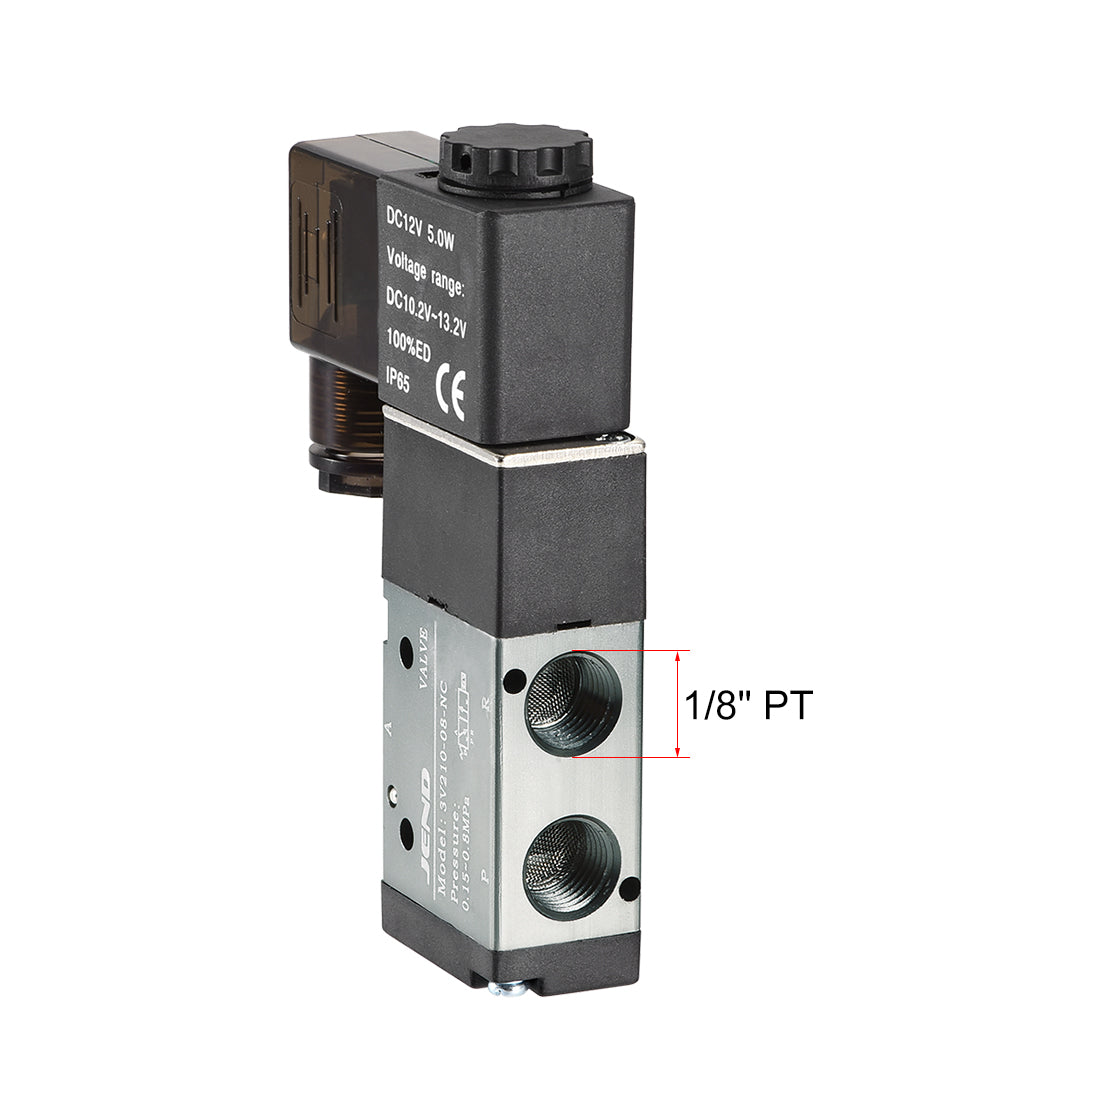 uxcell Uxcell 3V210-08 Pneumatic Air NC Single Piloted  Electrical Control Solenoid Valve DC 12V 3 Way 2 Position 1/4" PT Internally Acting Type